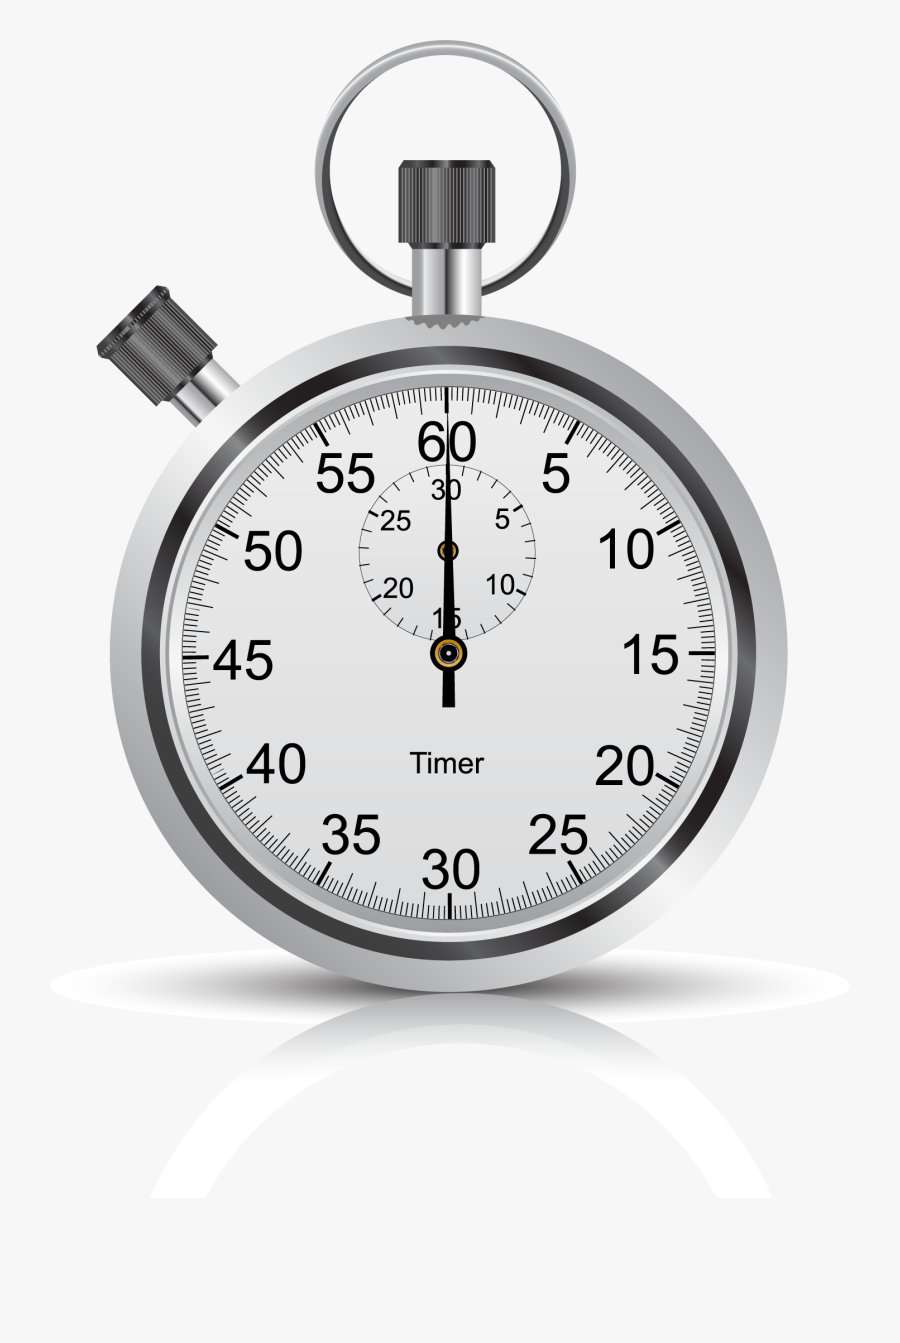 Stop Watch In Png, Transparent Clipart